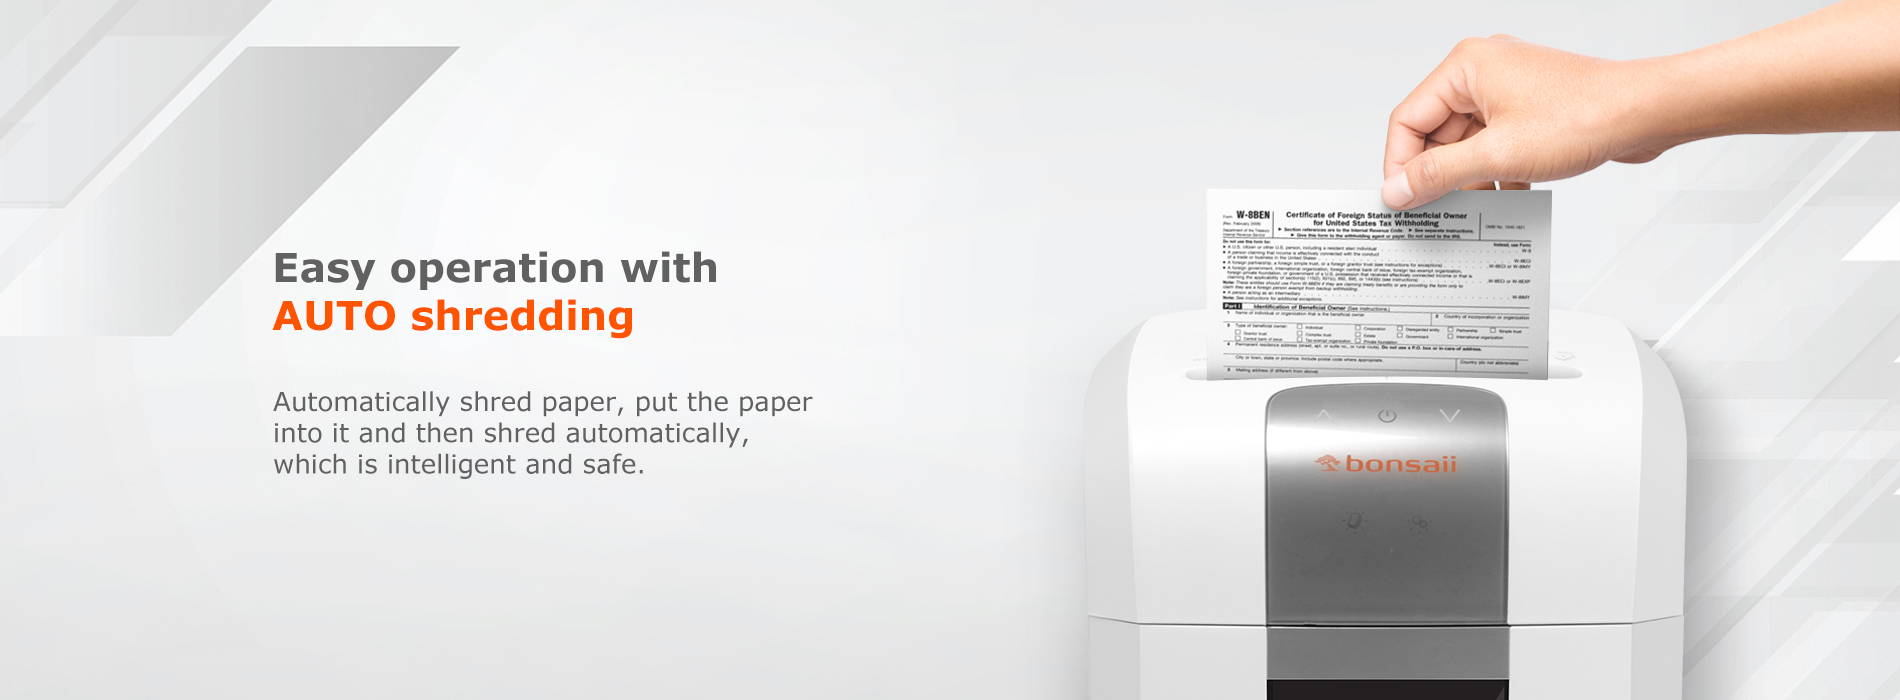 Easy operation with AUTO shredding Automatically shred paper, put the paper into it and then shred automatically, which is intelligent and safe